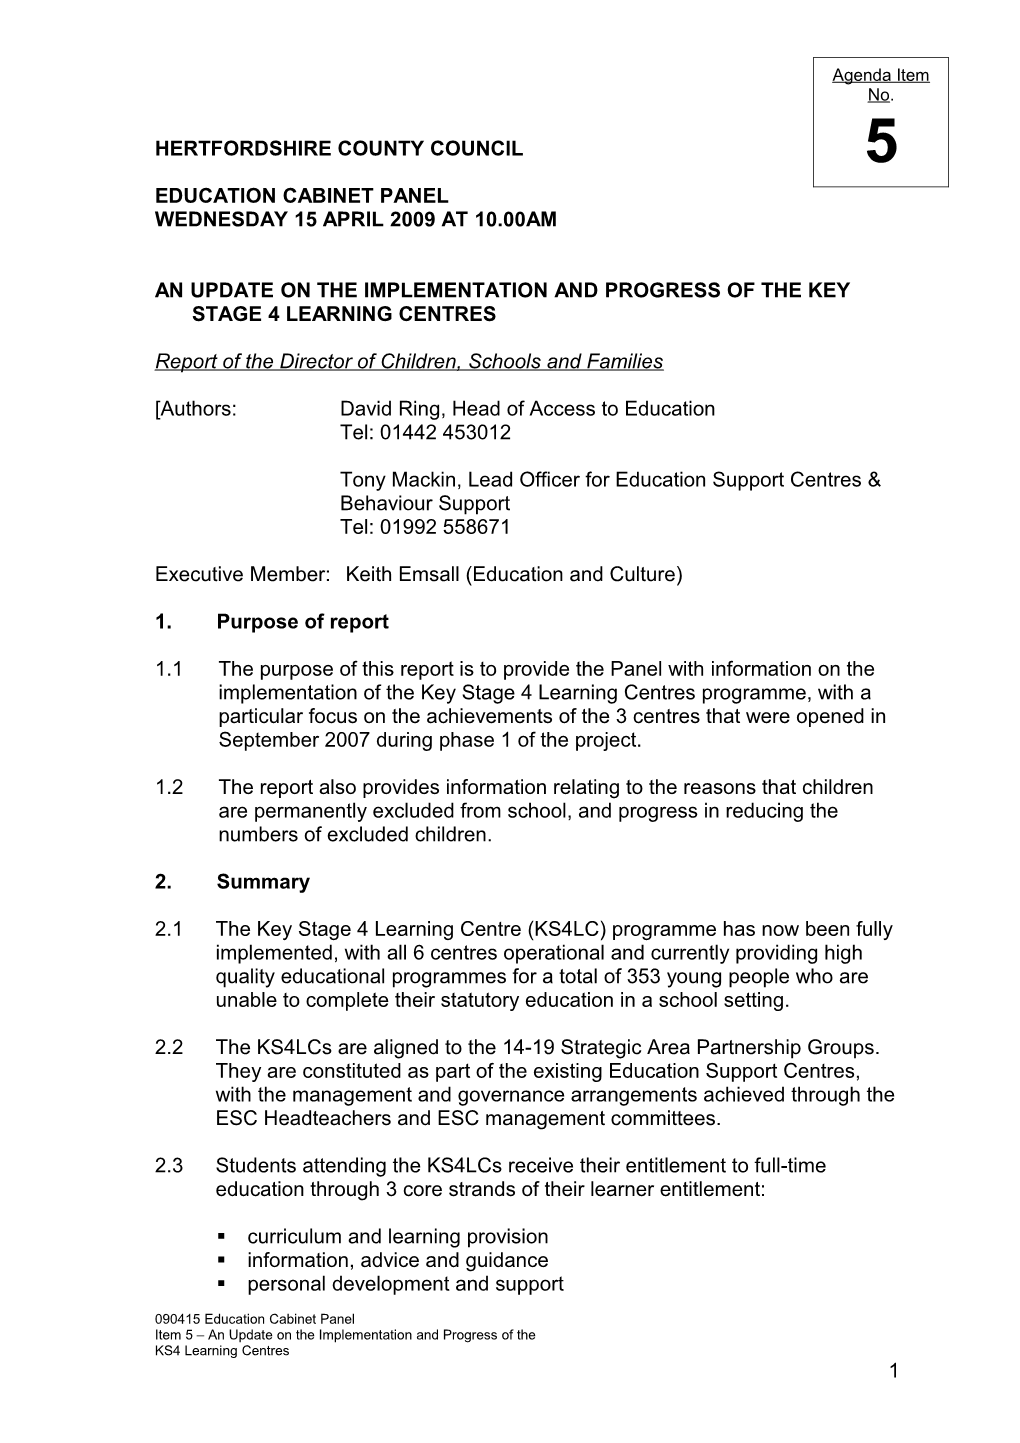 Education Cabinet Panel Wednesday 15 April 2009 at 10.00Am Item 5 - an Update on The